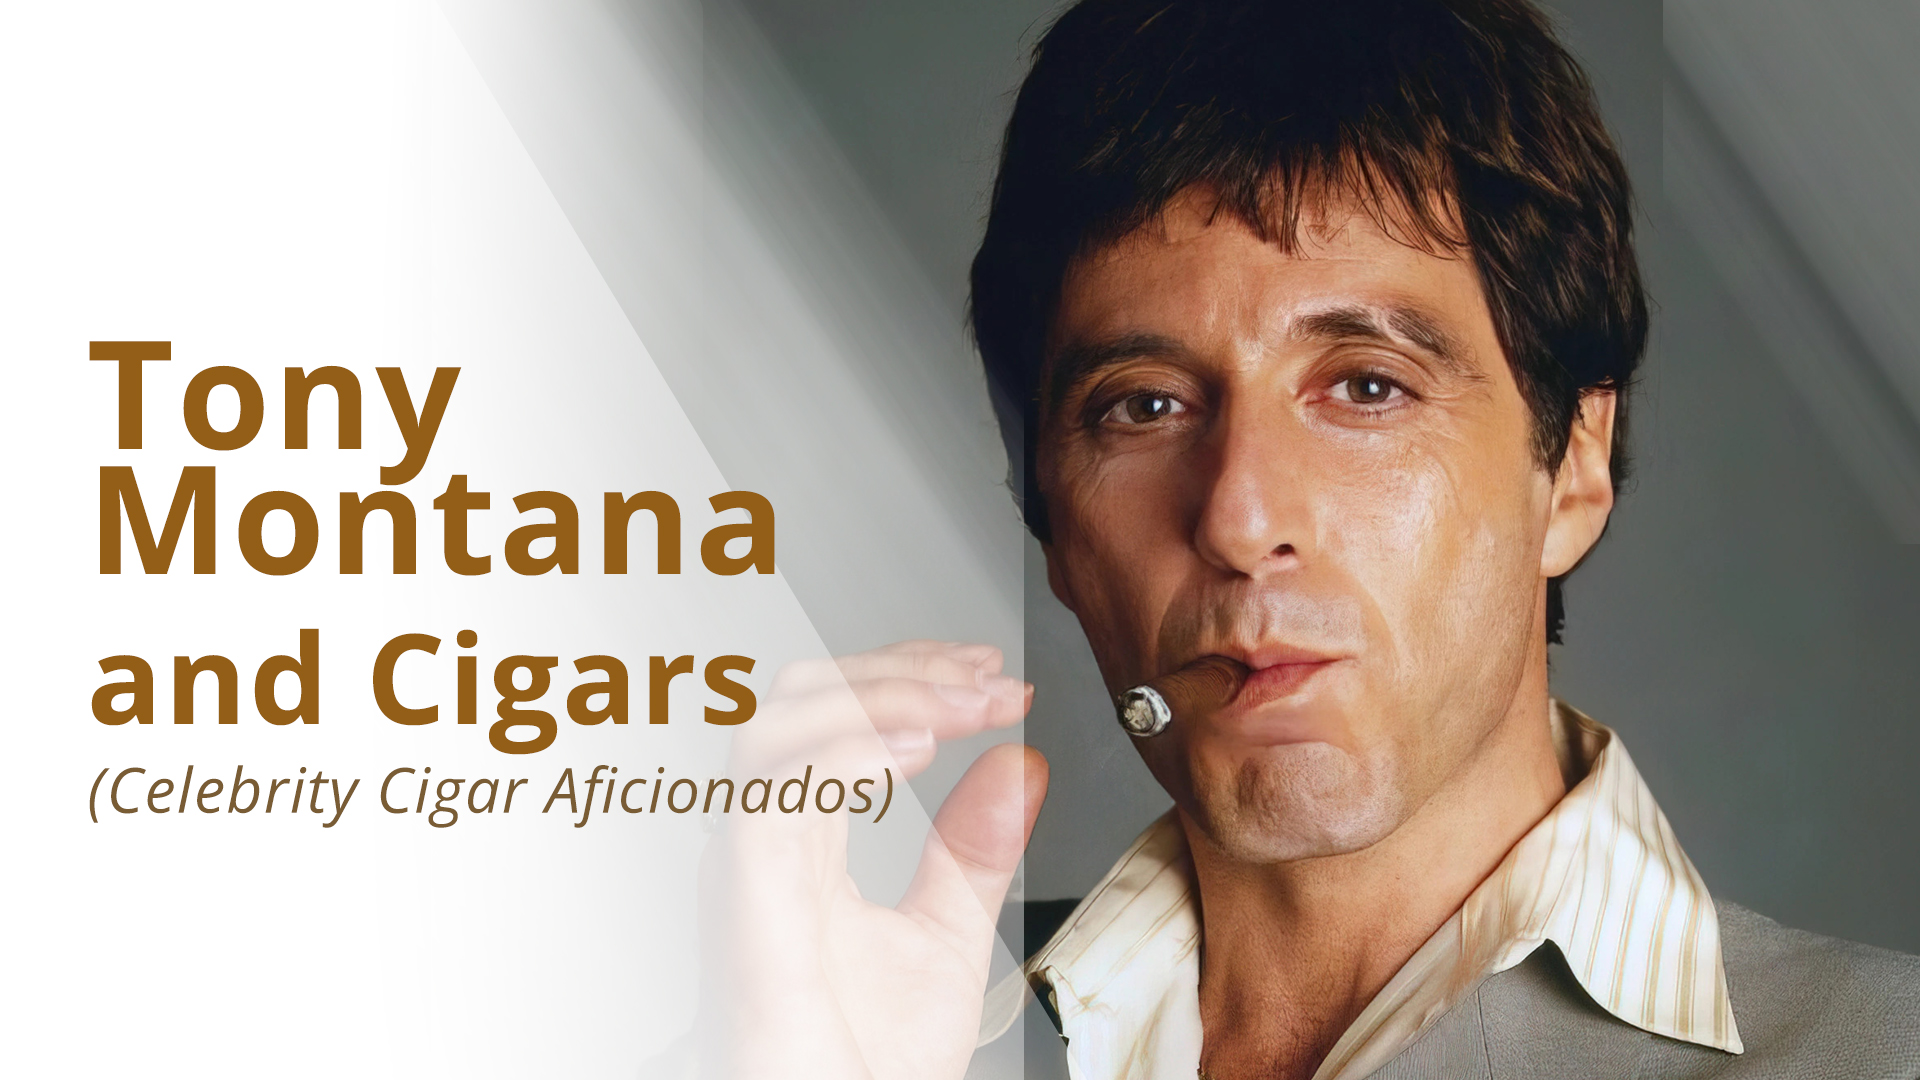 What cigars did Tony Montana from Scarface smoke